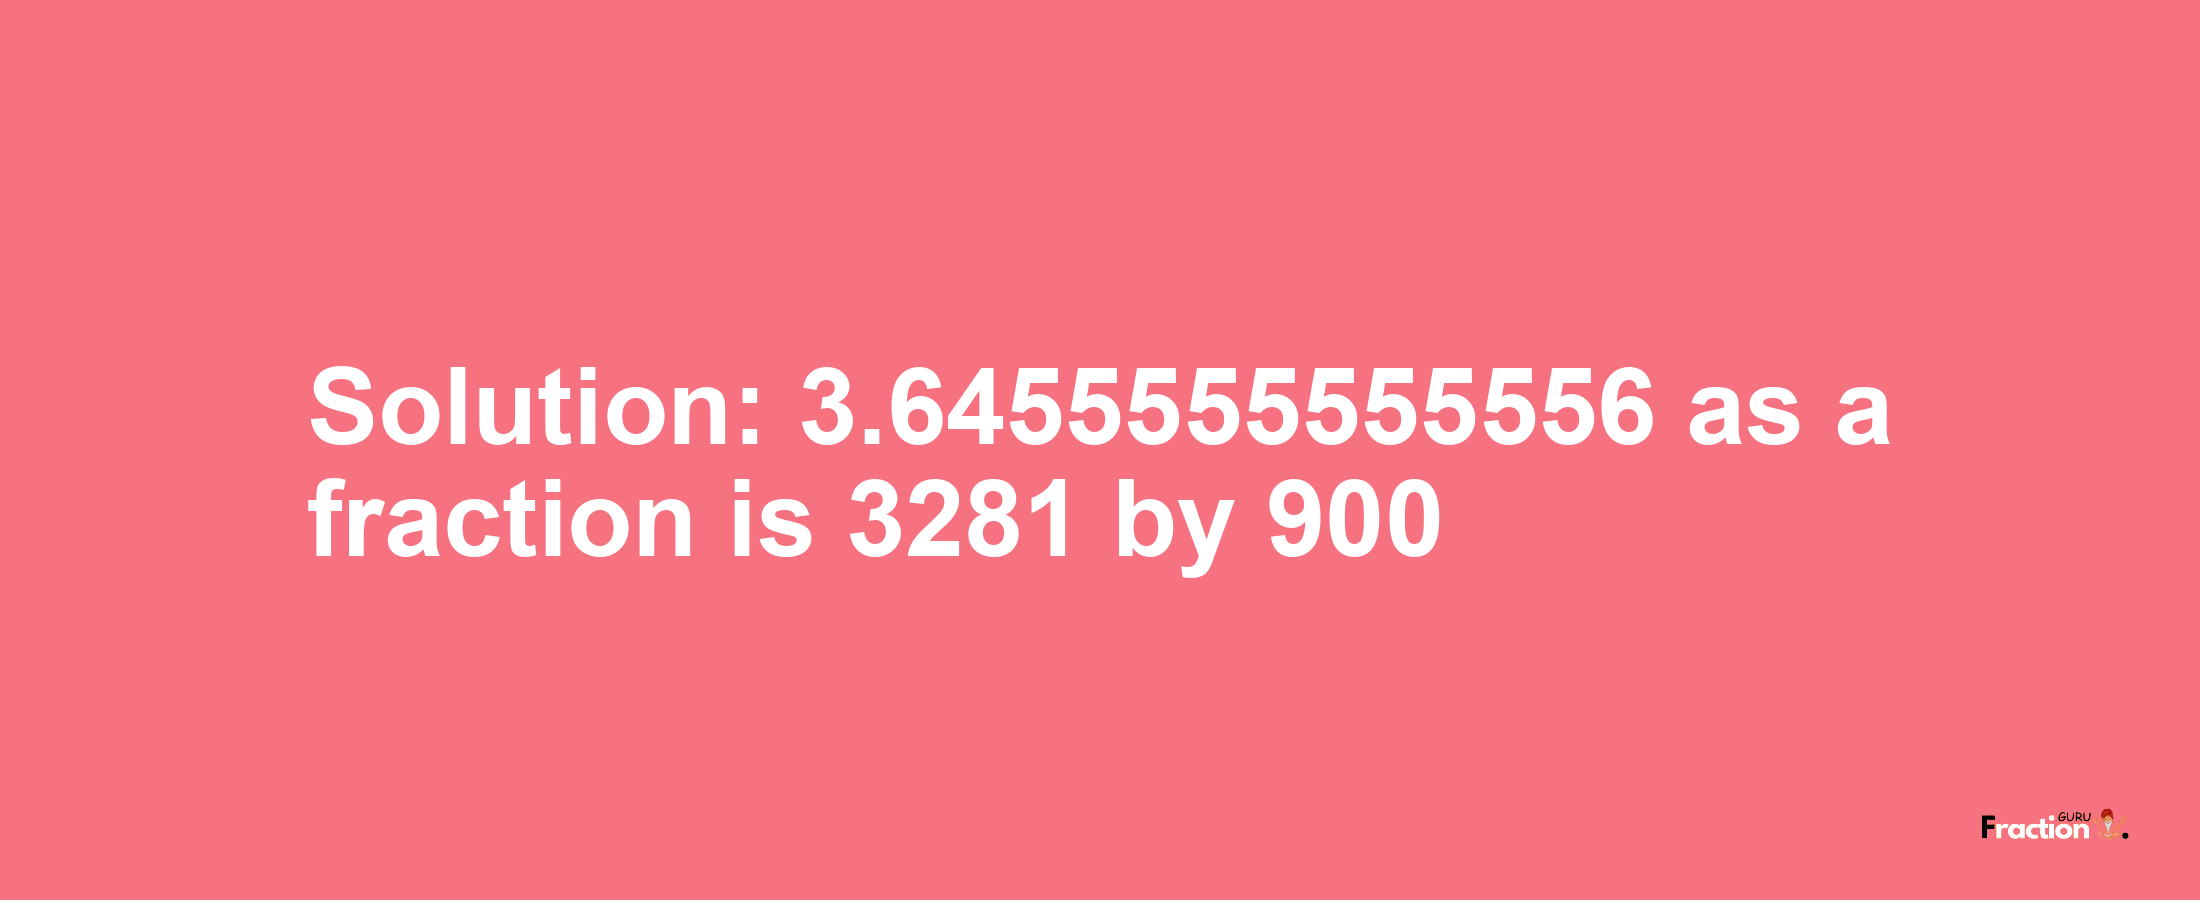 Solution:3.6455555555556 as a fraction is 3281/900